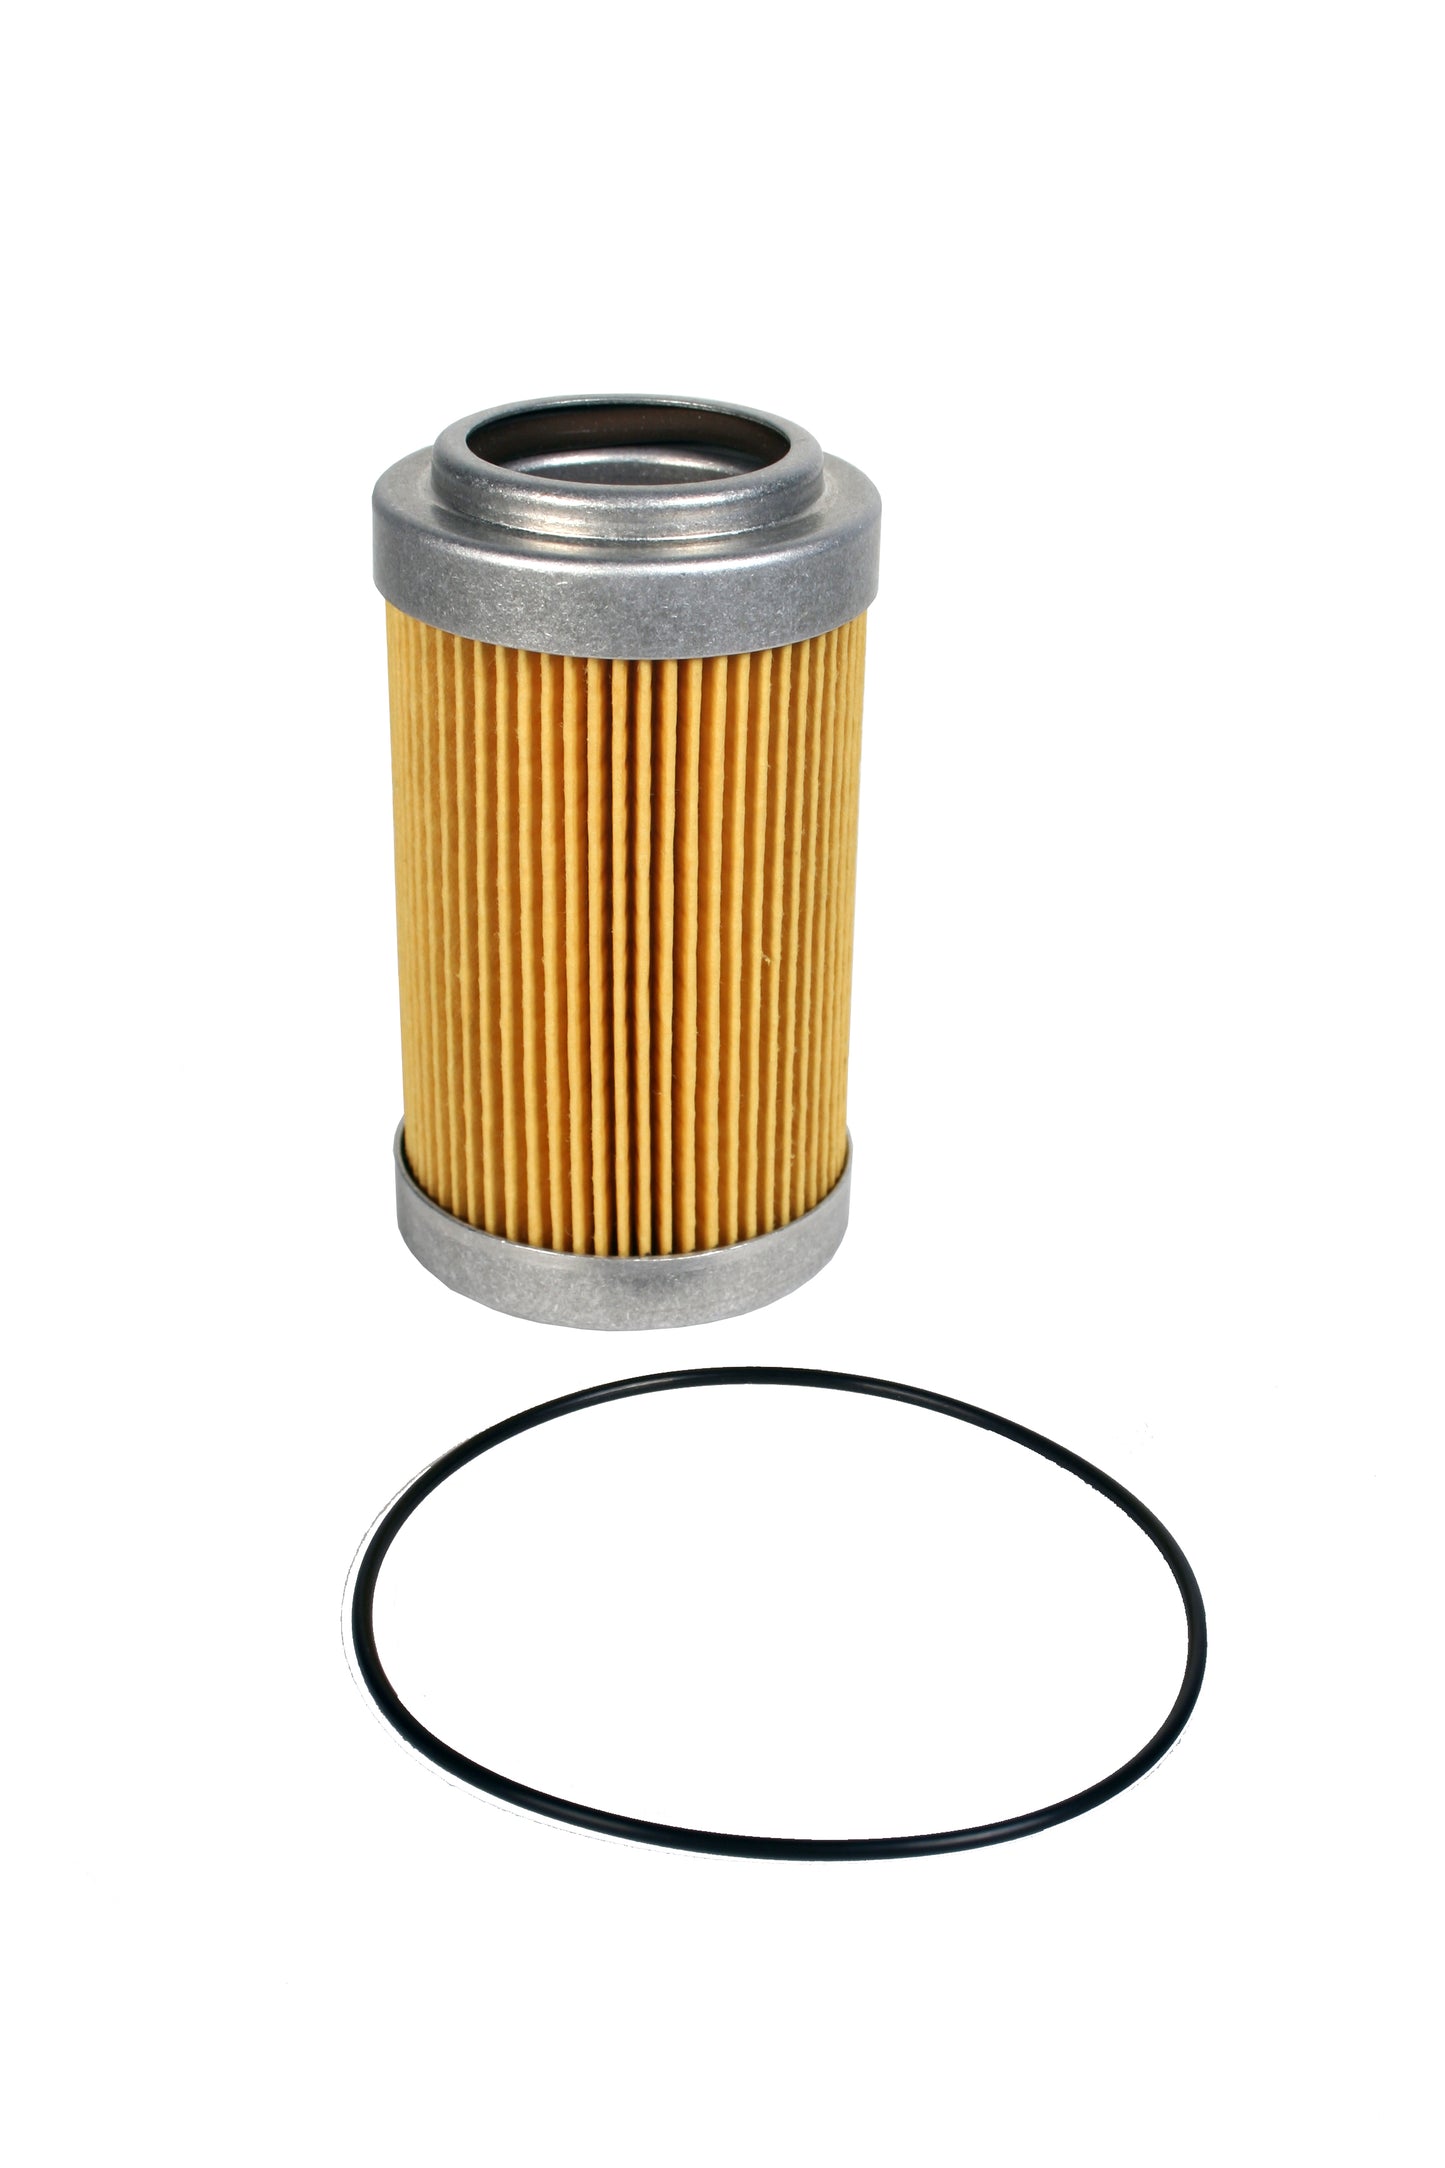 10 Micron Element for Canister Filters